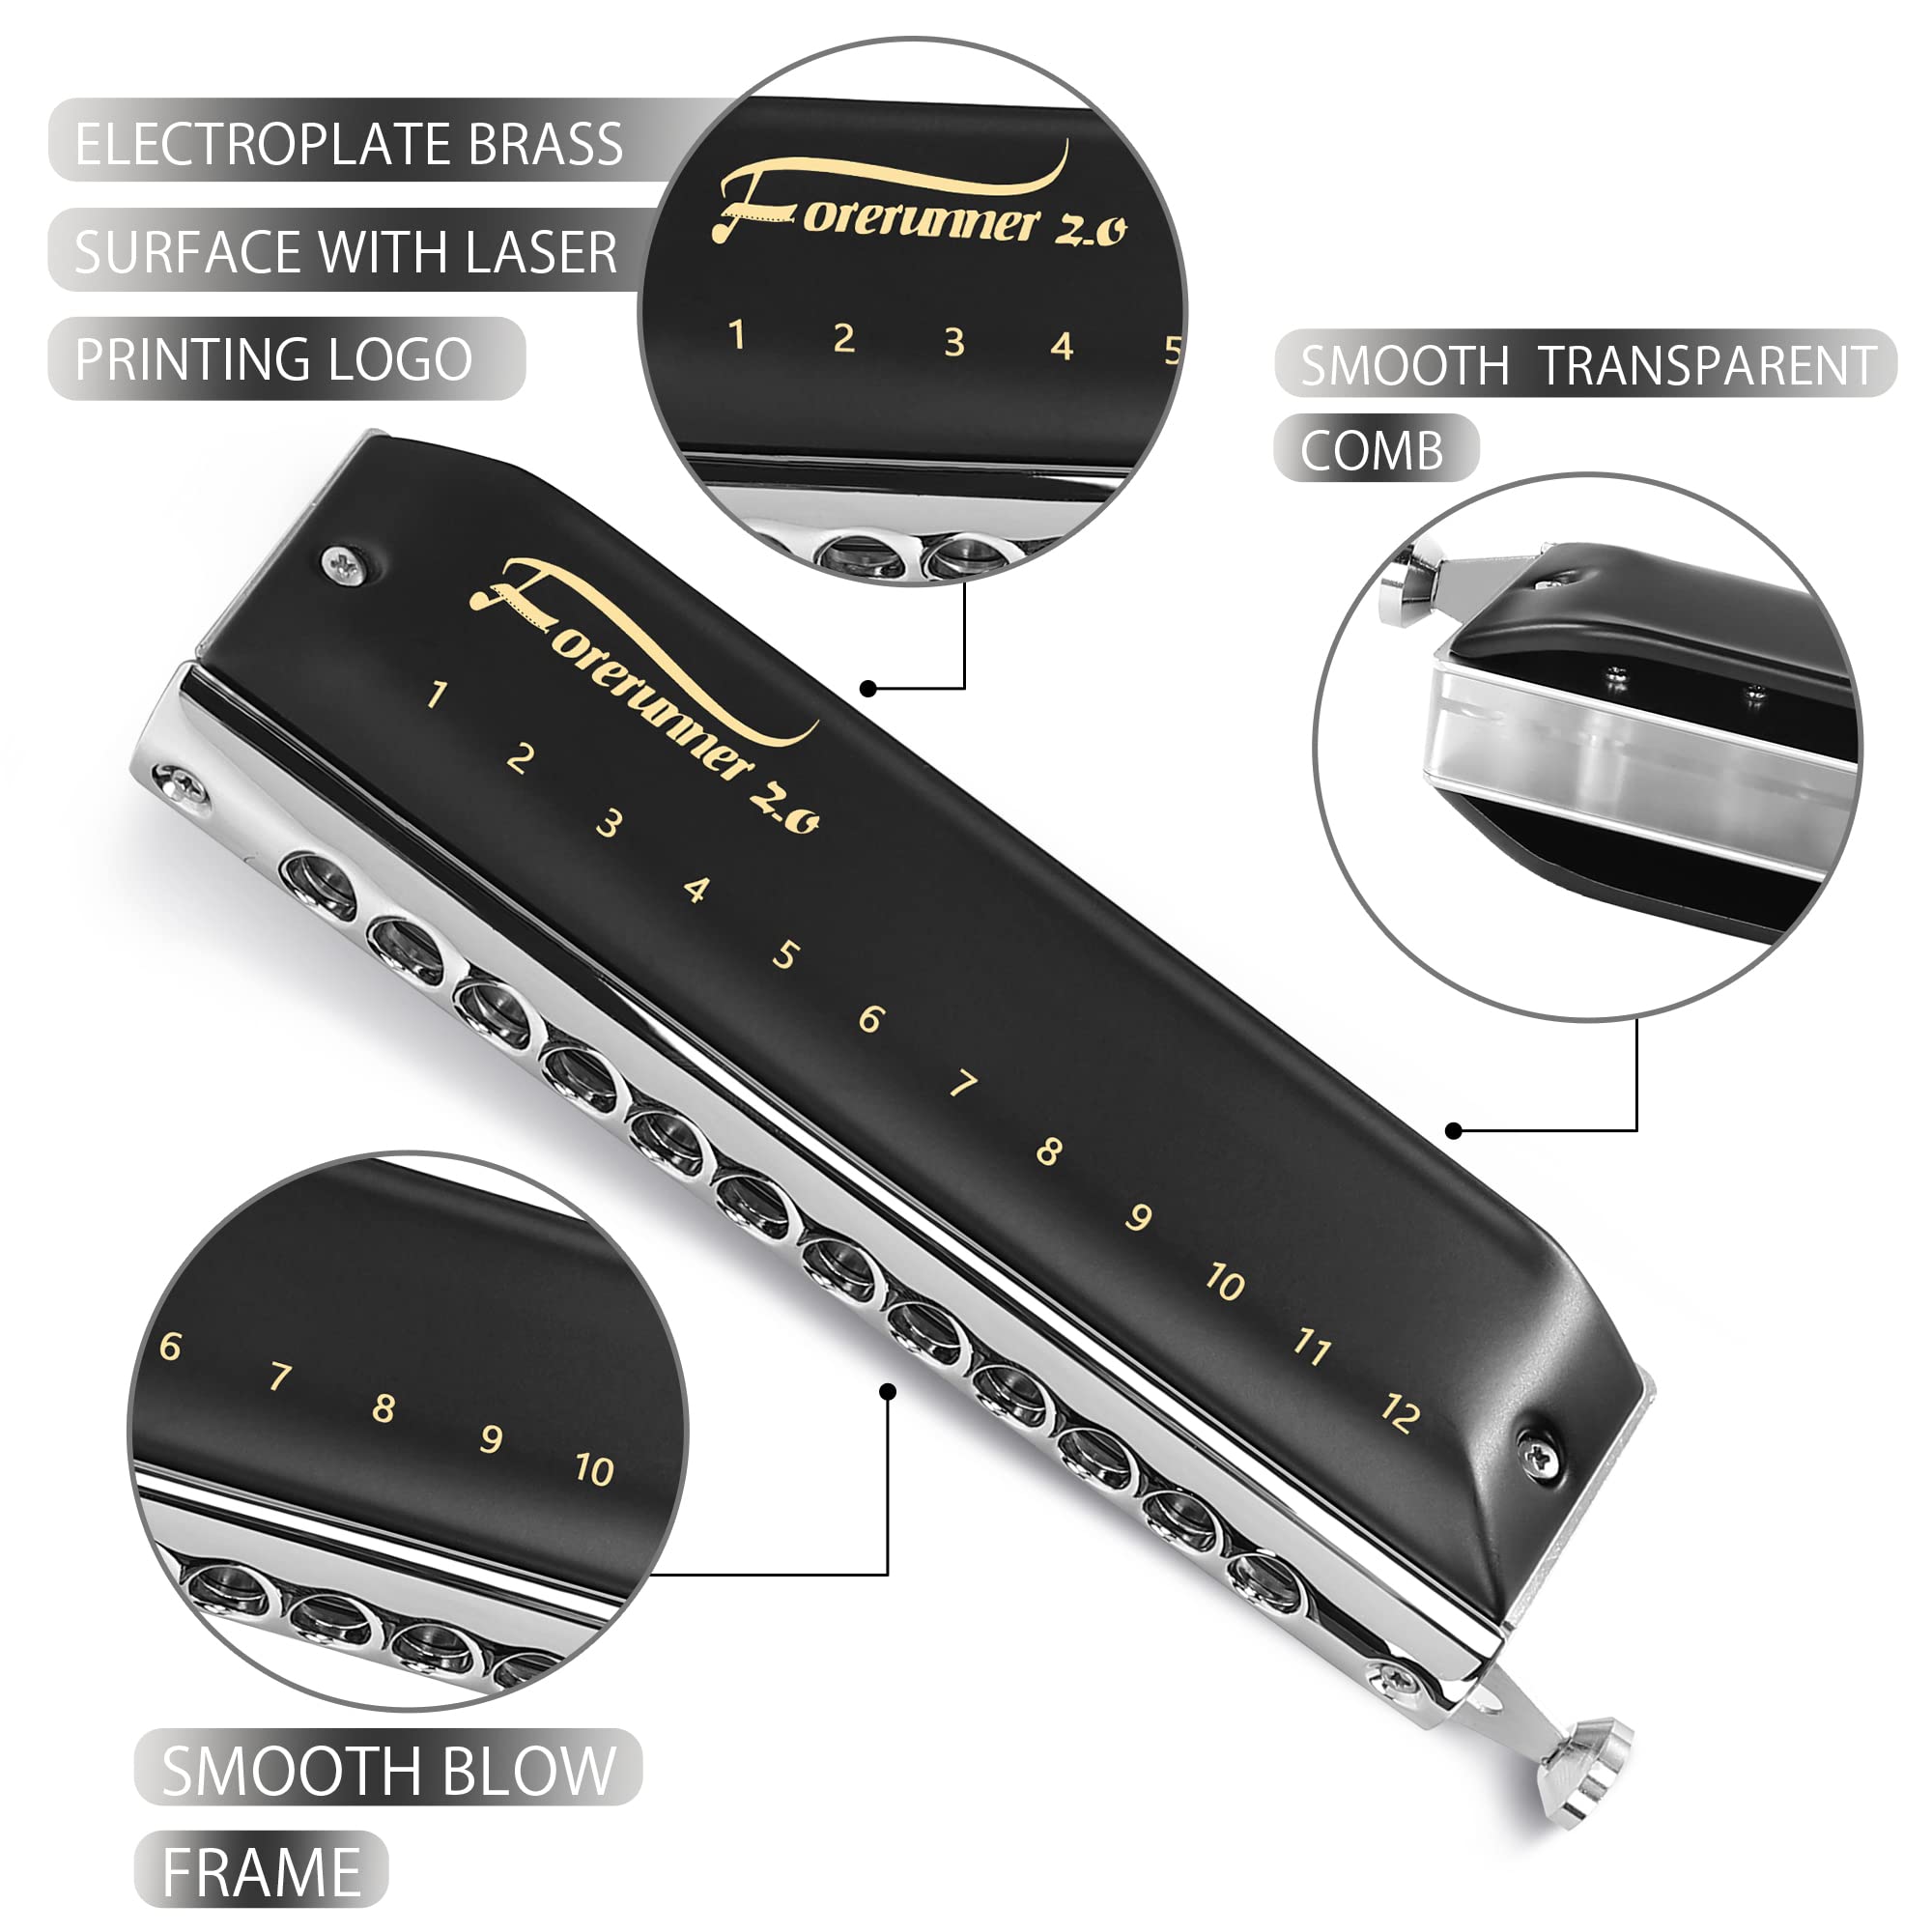 EAST TOP Updated FORERUNNER 2.0 without valves Chromatic Harmonica 12-Hole 48 Tones C Key Chromatic Mouth Organ Harmonica for Adults,Beginners and Students - Easttop harmonica